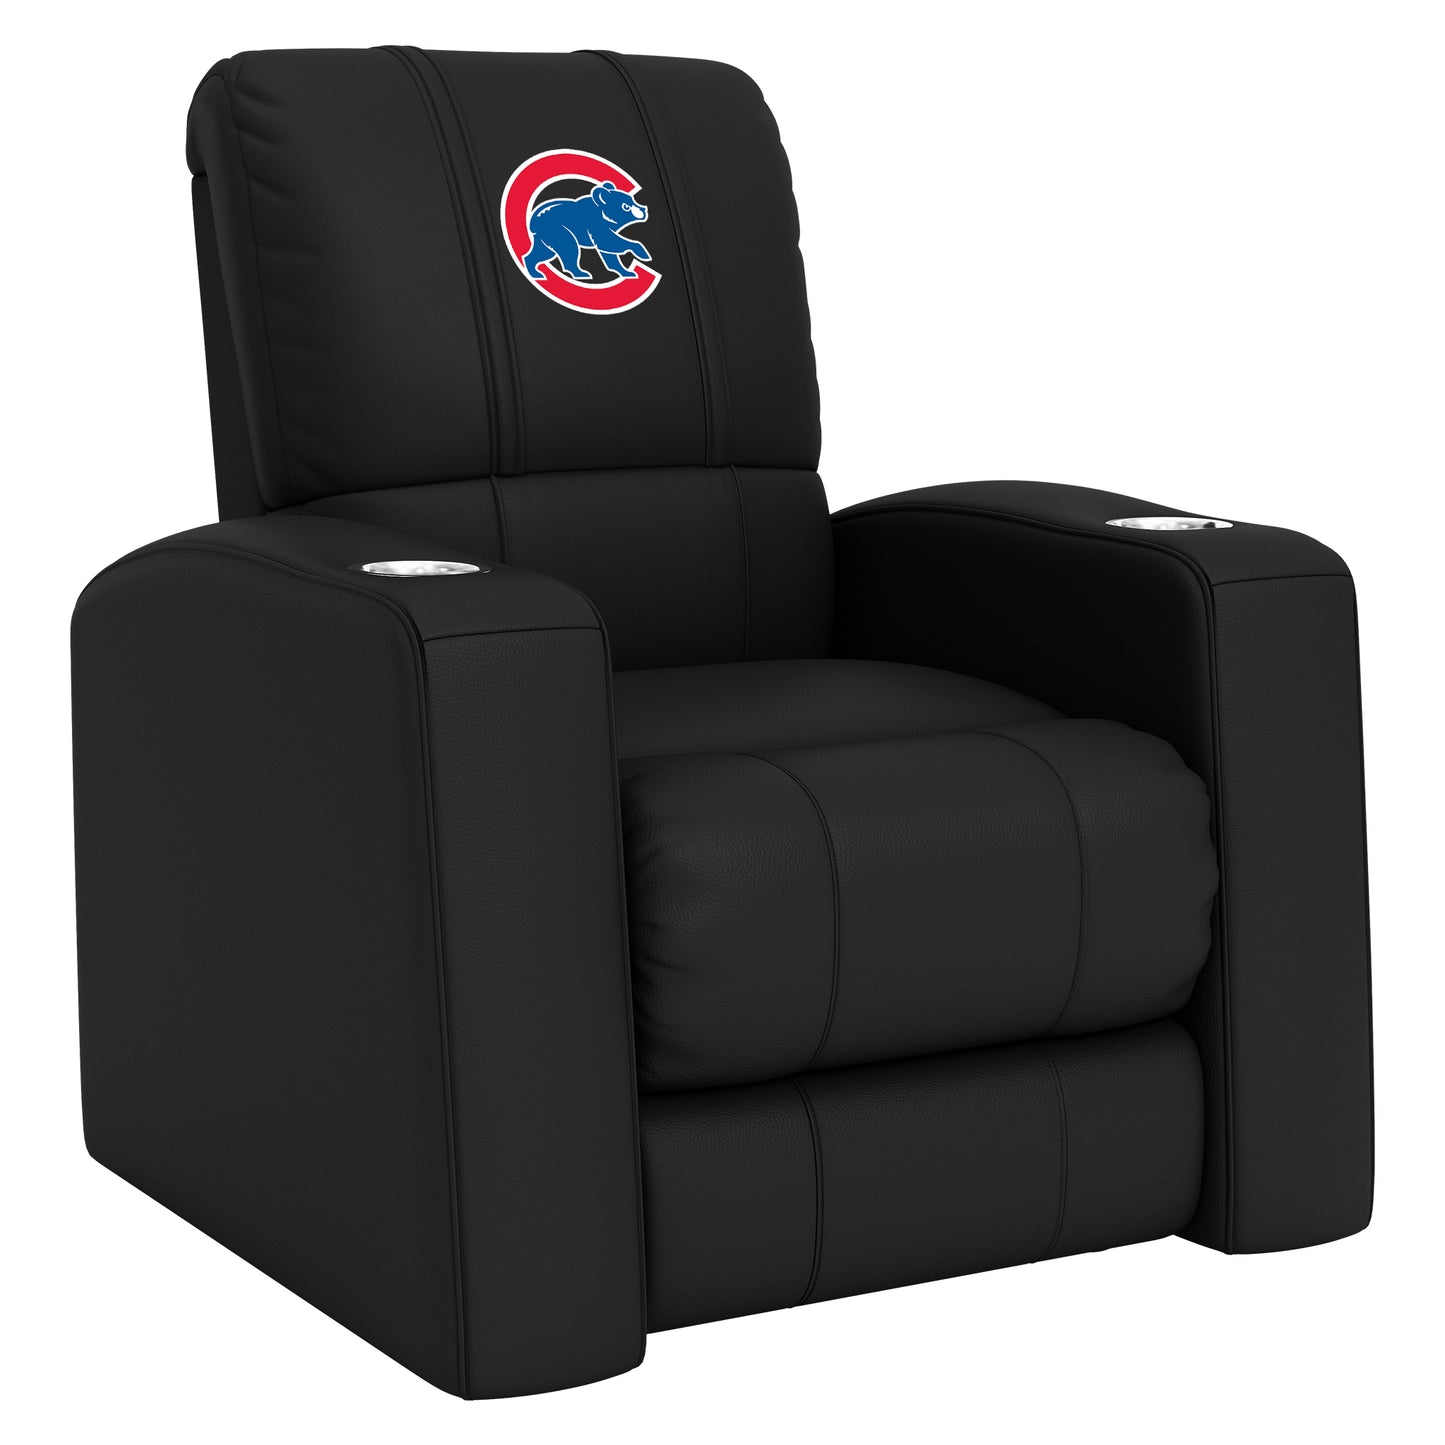 Relax Home Theater Recliner with Chicago Cubs Secondary